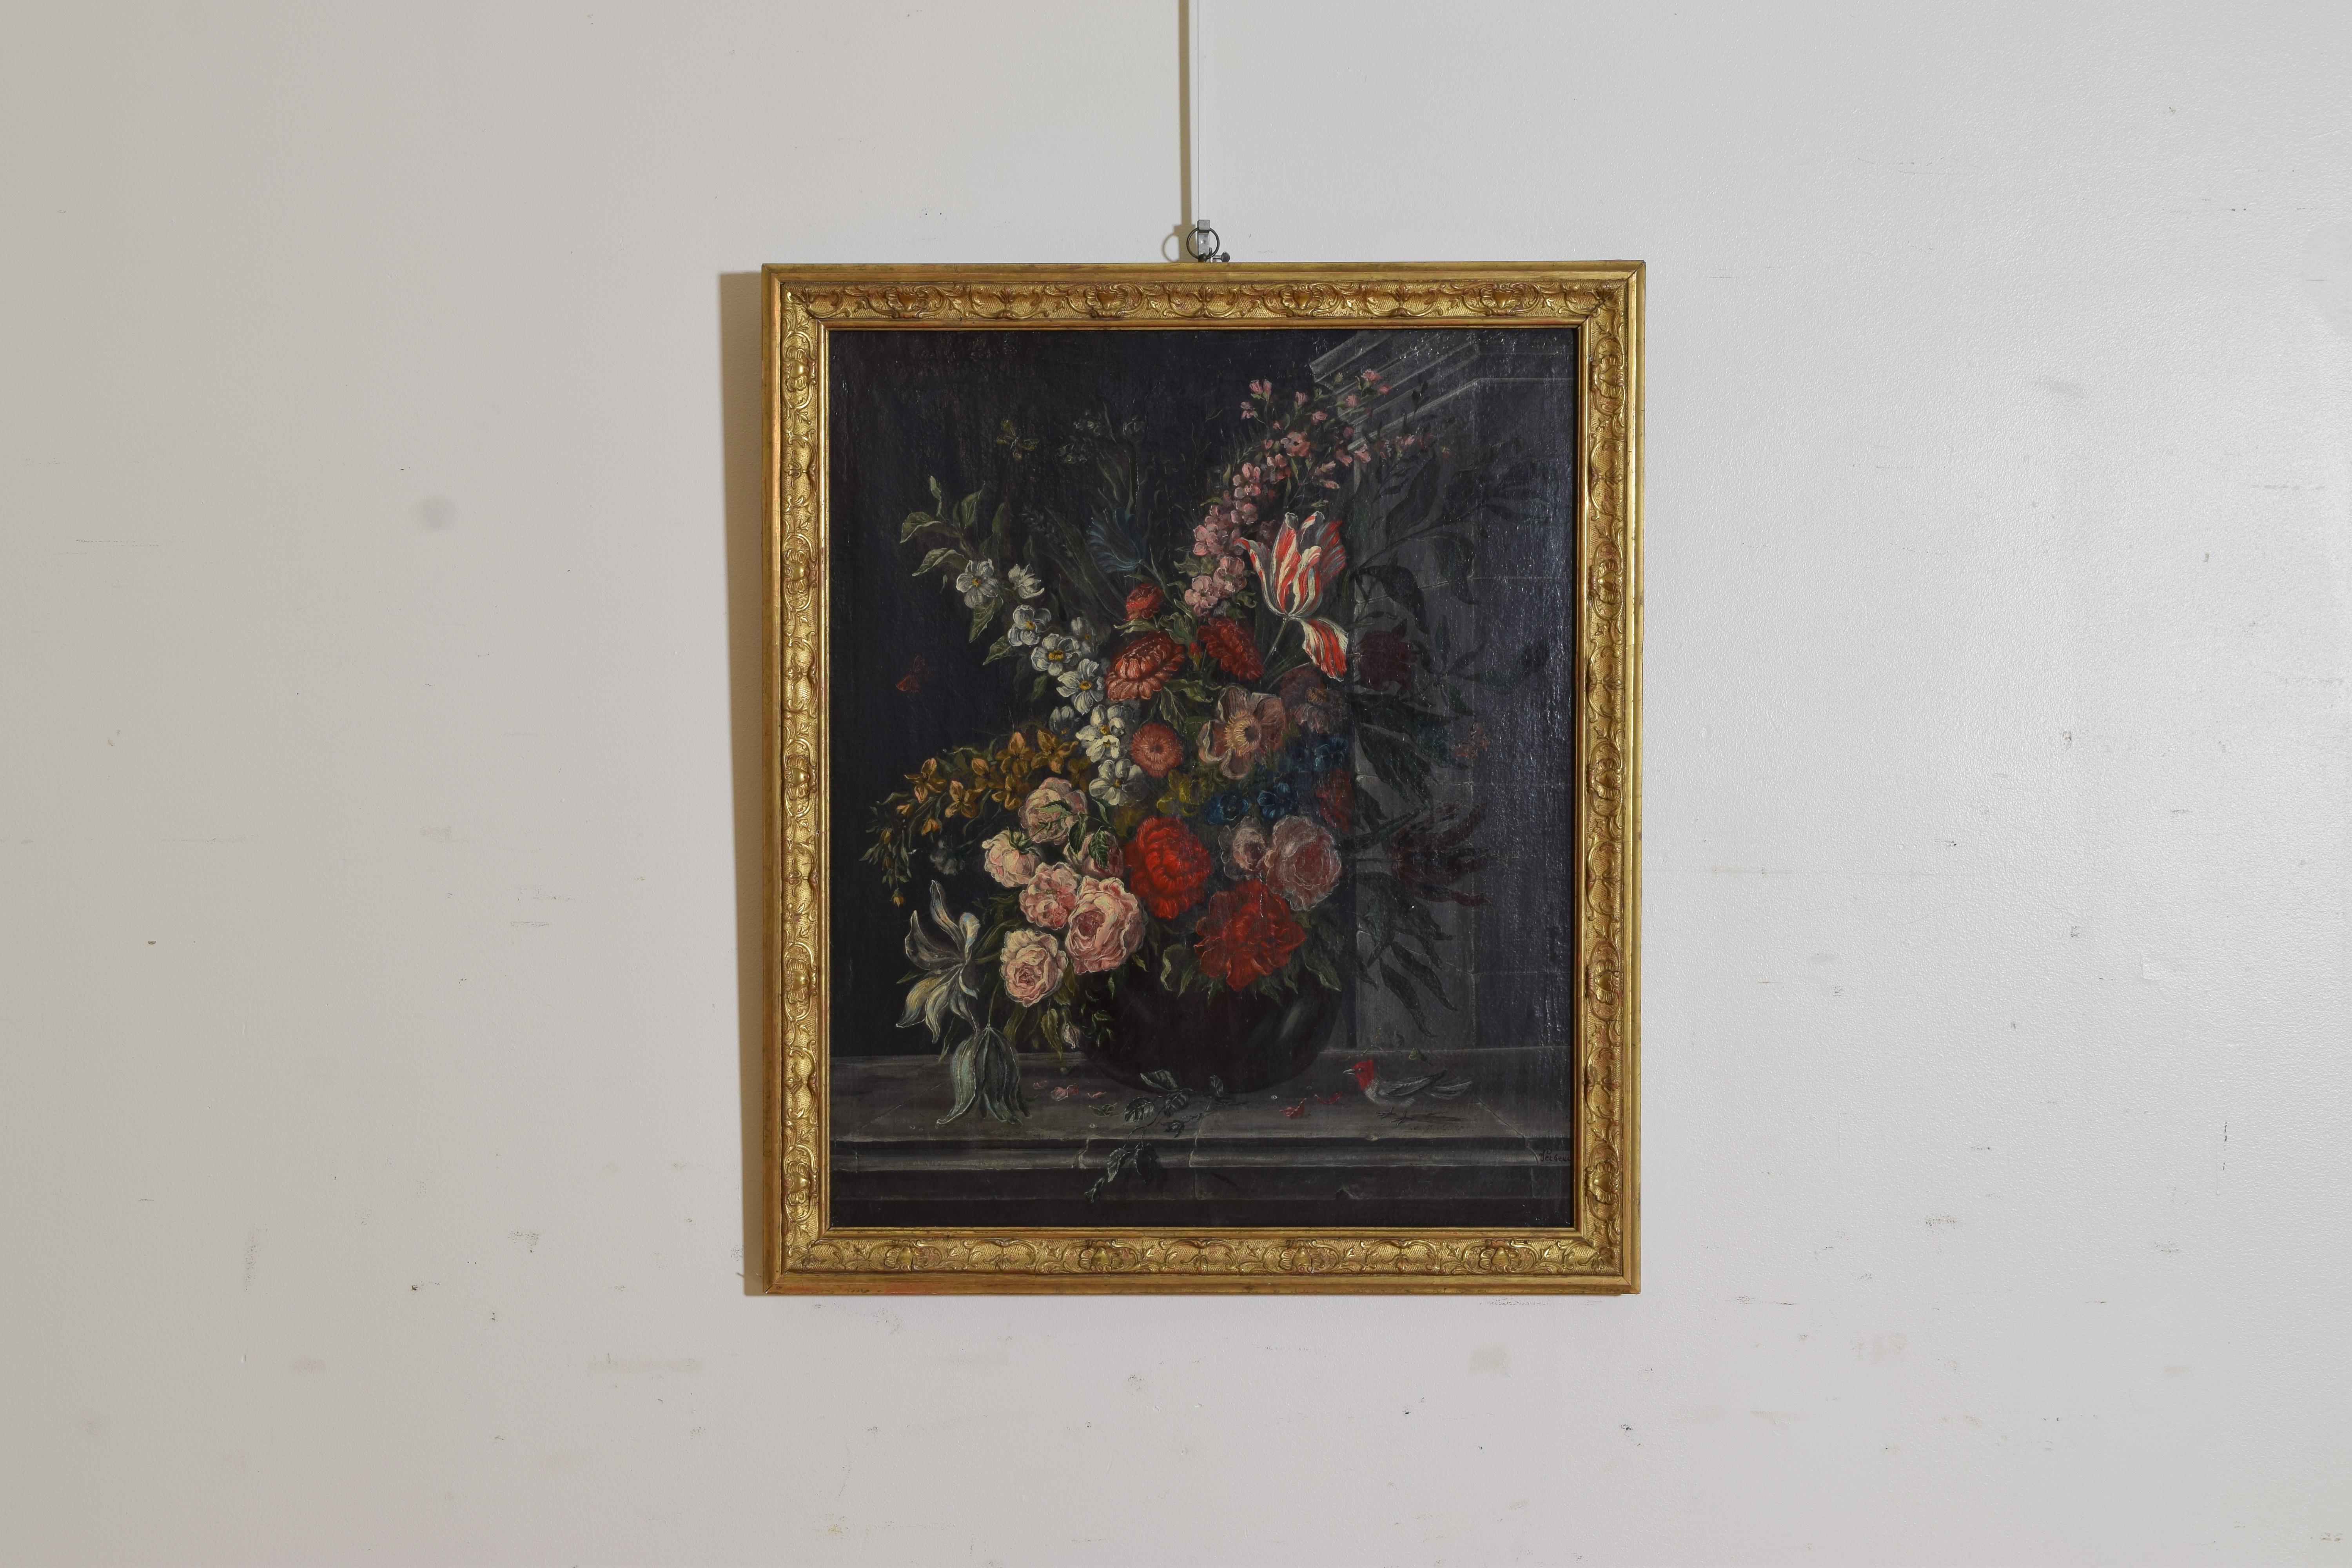 Depicting a vibrant bouquet of flowers in a vase placed on a stone window sill with flying butterflies and a red bird, retaining a period carved giltwoood and gilt gesso frame, signed lower right 